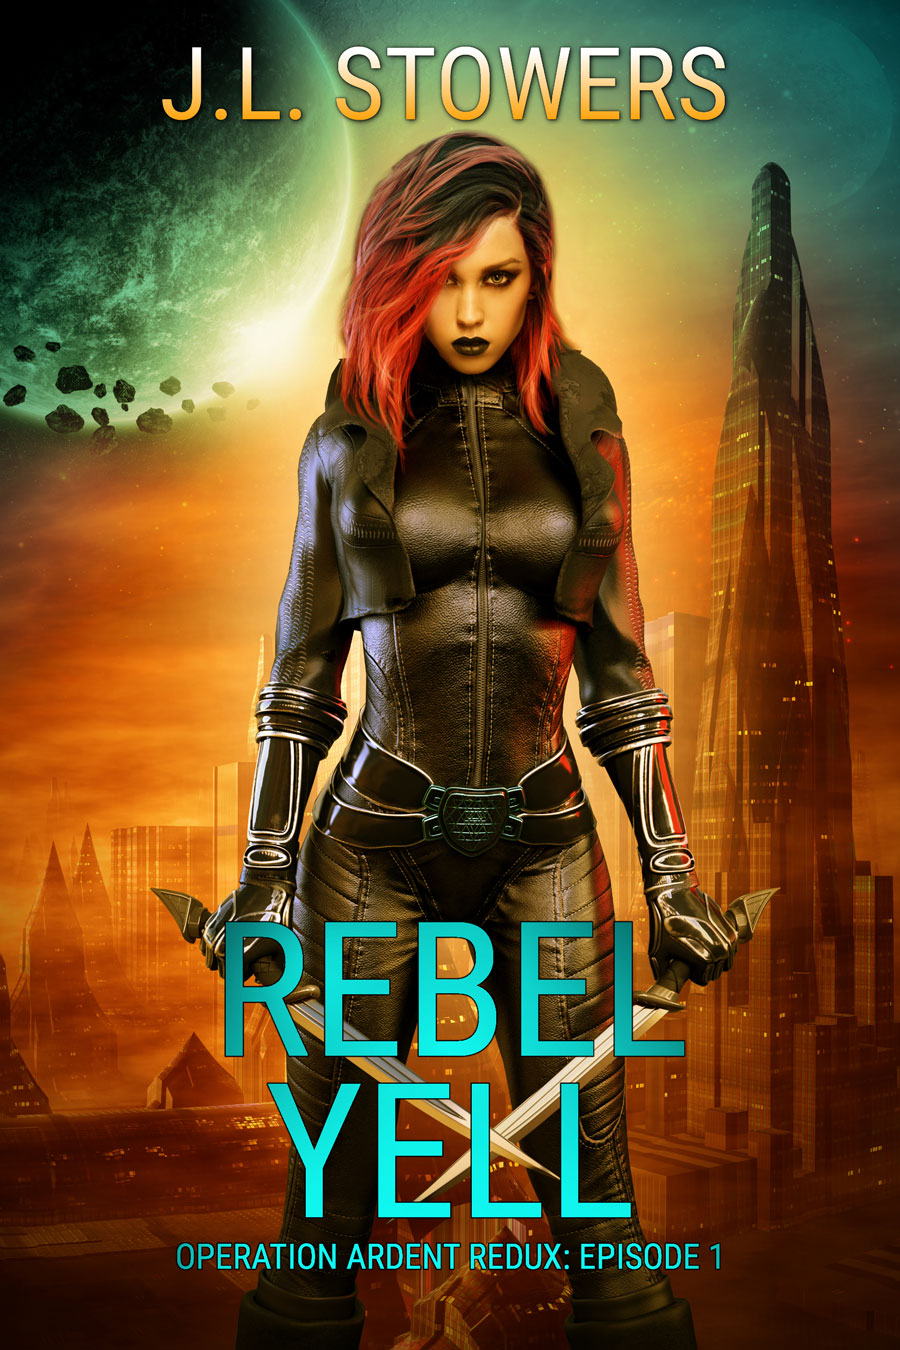 An image of the book cover of Rebel Yell, the first episode in the three-part miniseries Operation Ardent Redux, a spin-off to the Ardent Redux Saga by space adventure author J. L. Stowers. The Cover features Roni on an alien planet with a red sky. She’s dressed in a leather spacesuit and holds twin swords, poised to take on the evil galactic empire in this exciting space opera. 